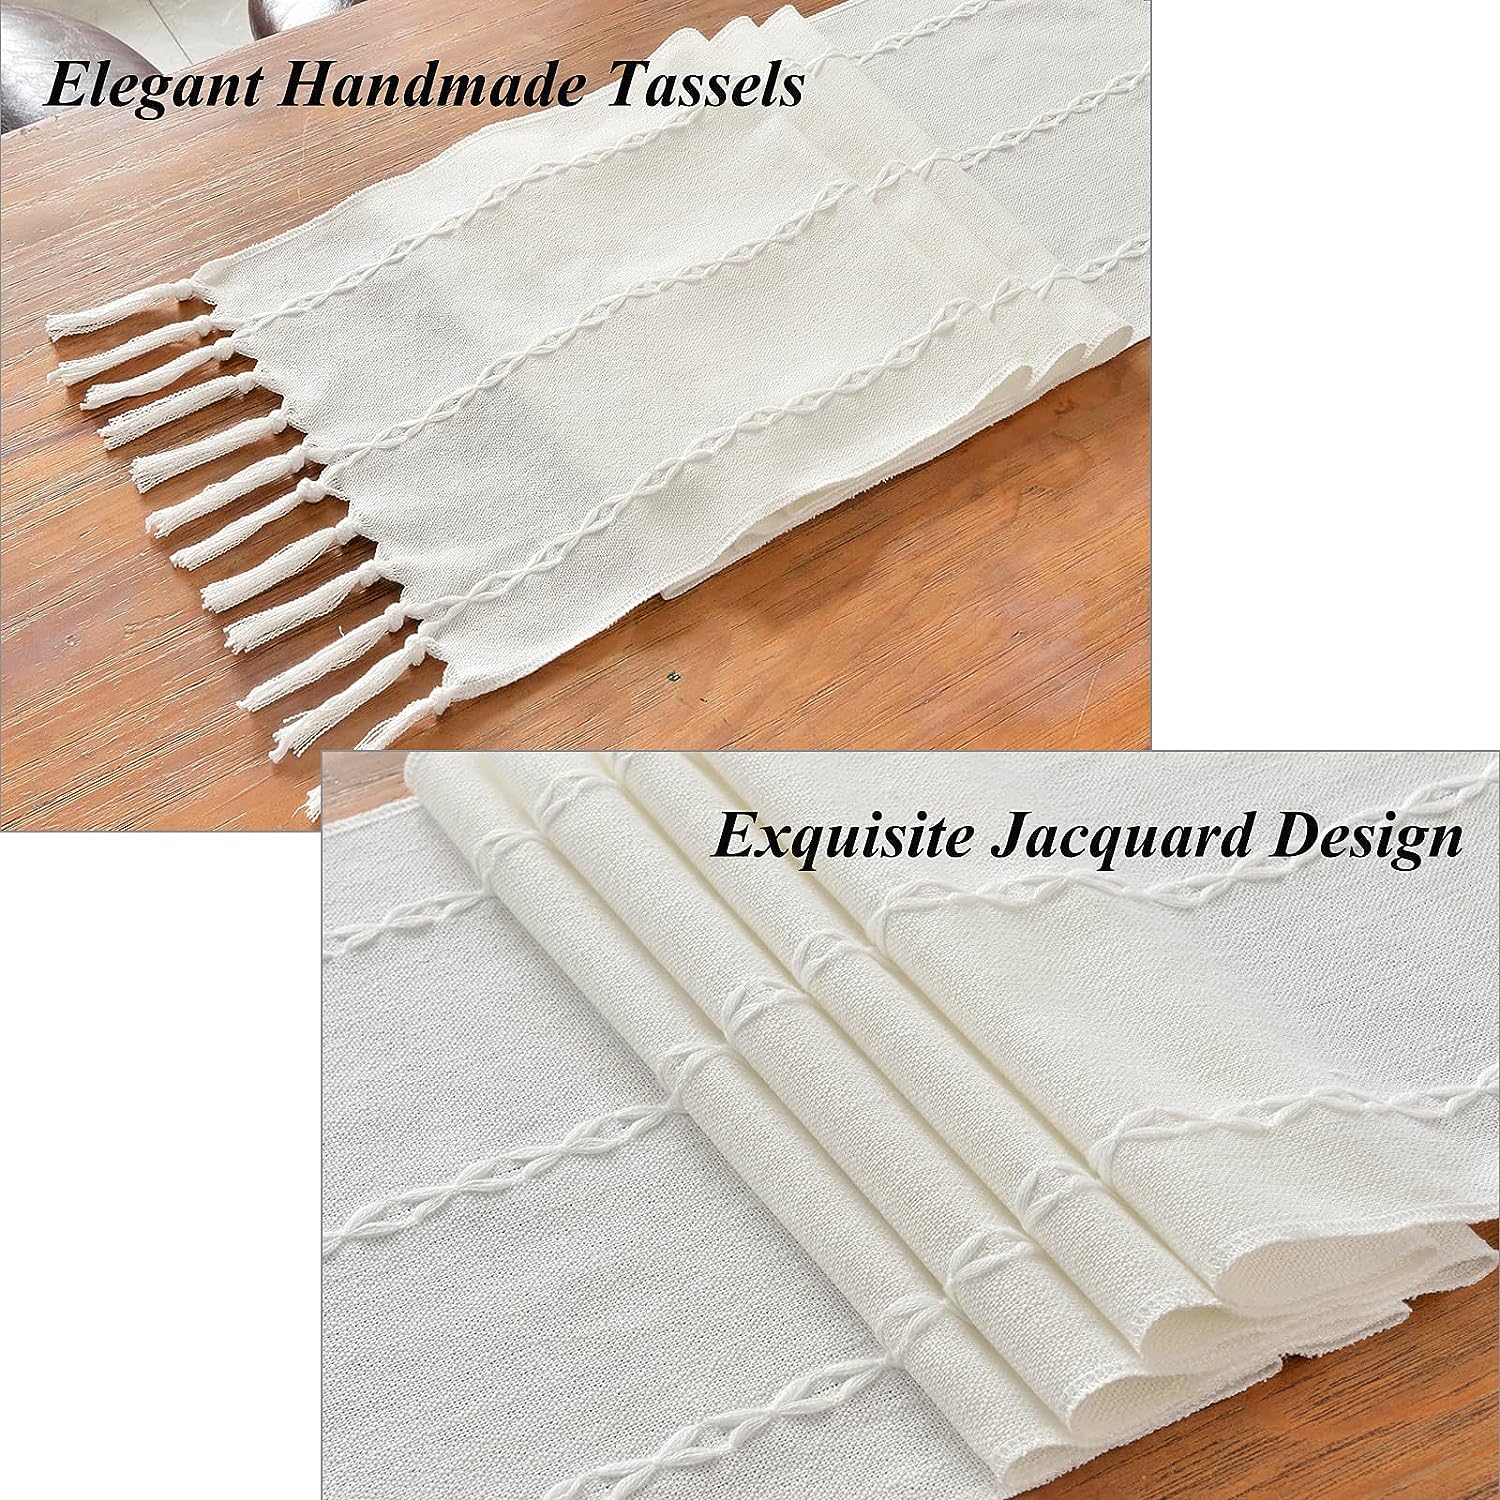 Wracra Cotton Linen Table Runner Farmhouse Style White Table Runner 180cm with Hand-tassels for Party, Dining Room Decorations Dessert Table Decor(White, 180cm) 2